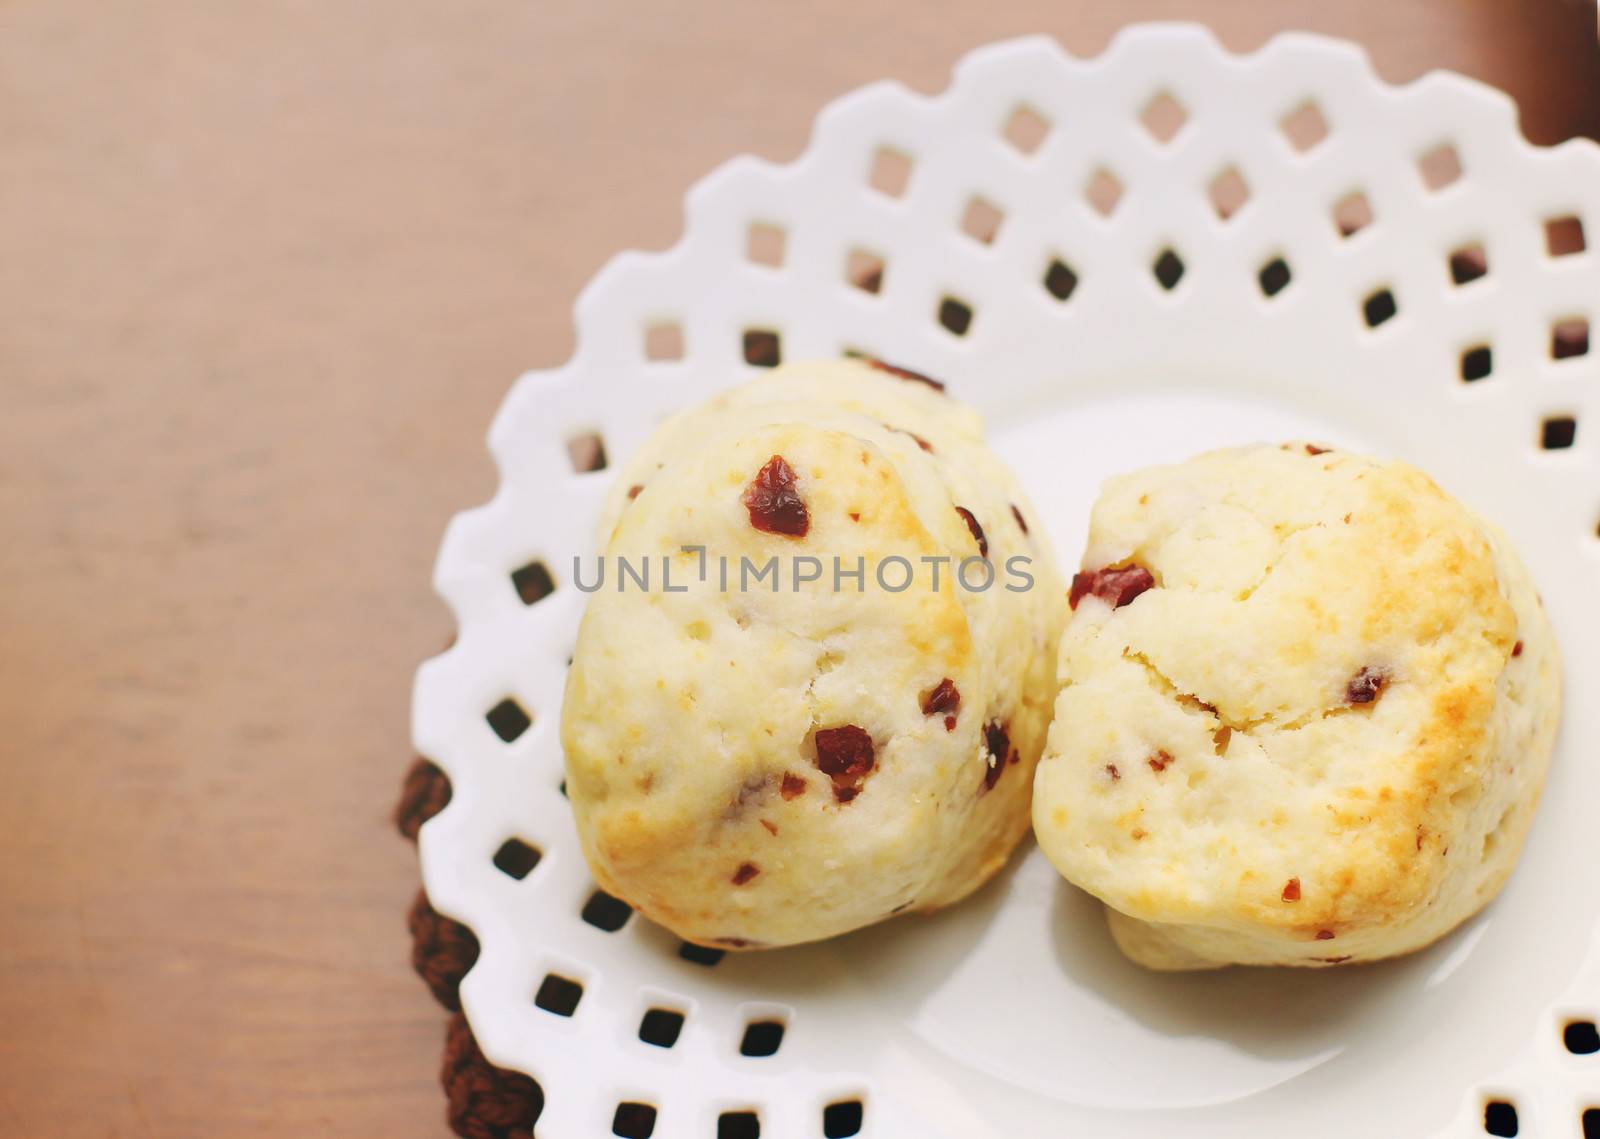 Top view of freshly baked scones with retro filter effect by nuchylee